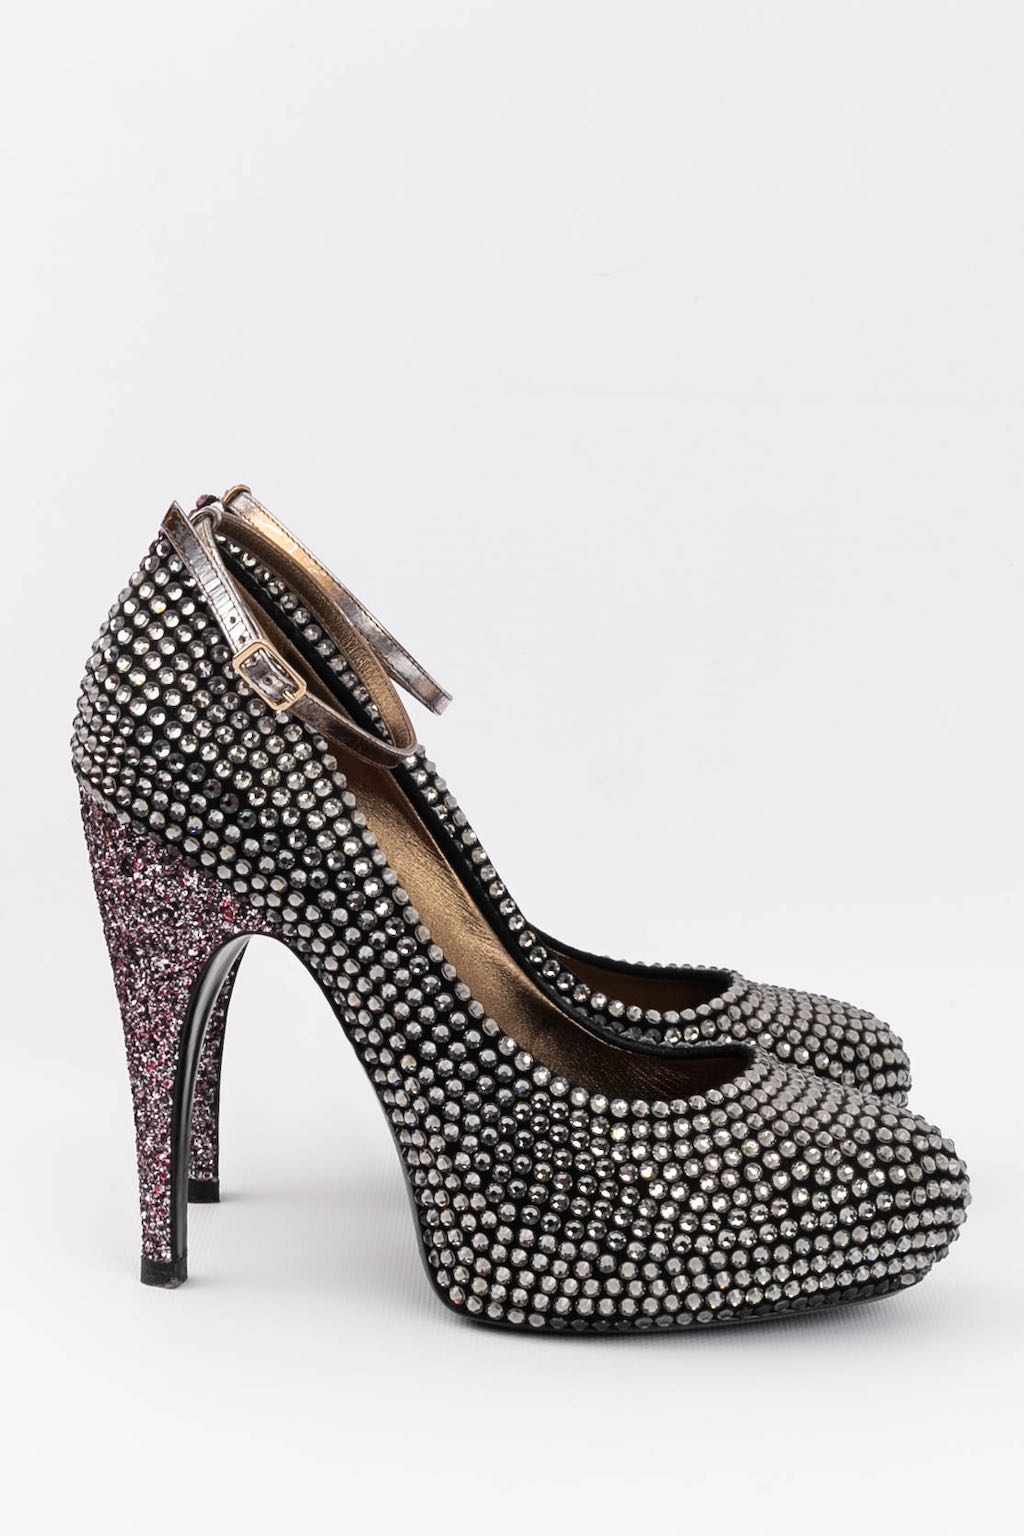 Lanvin sequined pumps, 2013 Winter Collection